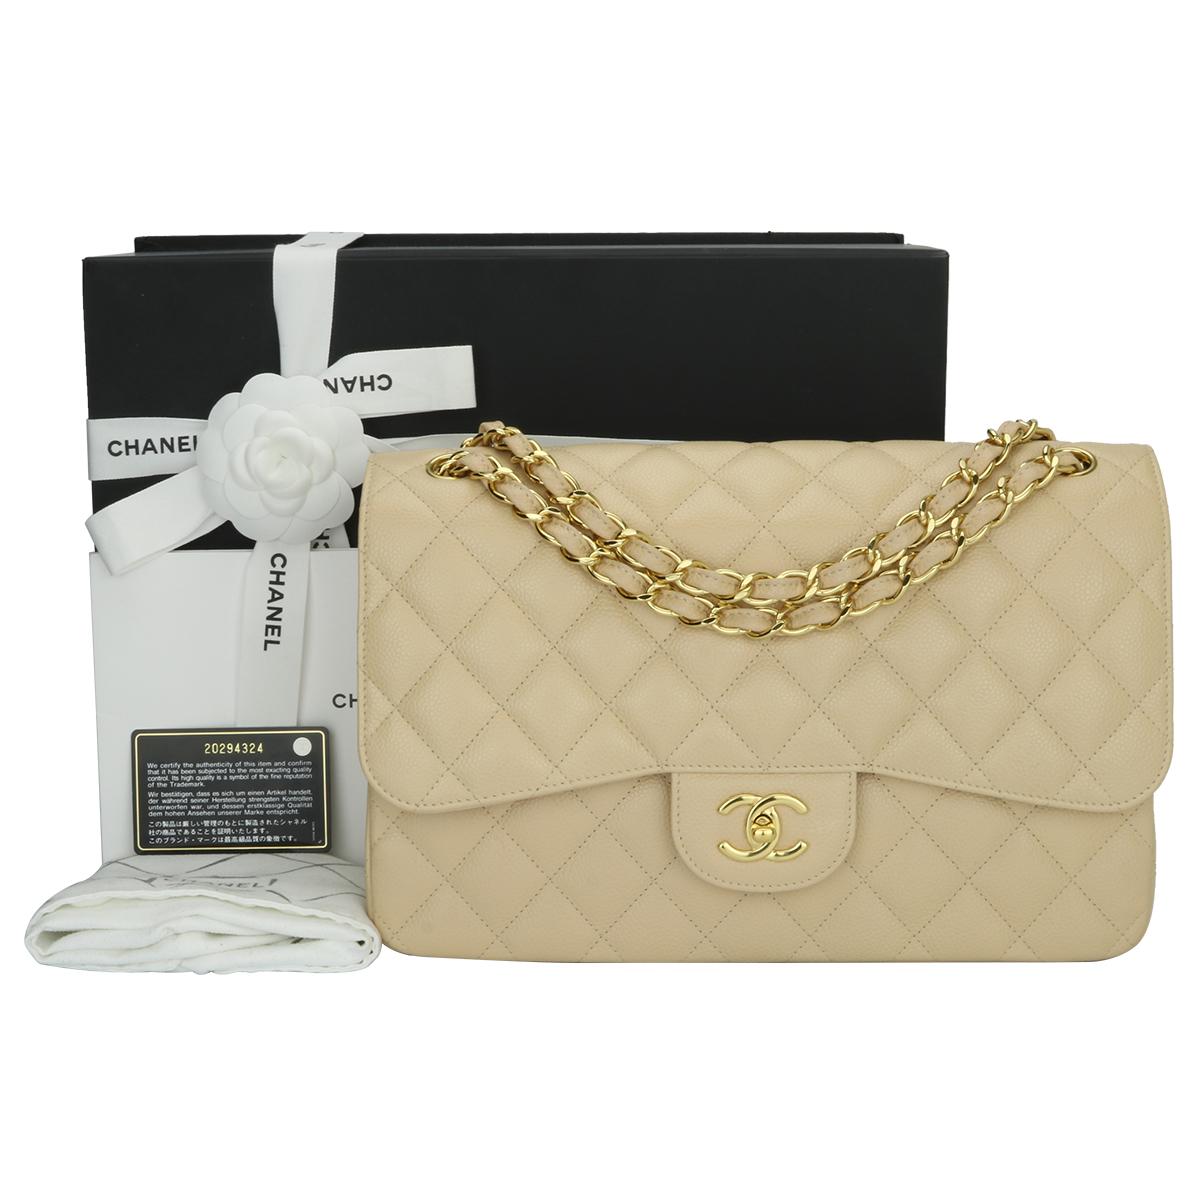 Authentic CHANEL Classic Jumbo Double Flap Beige Clair Caviar with Gold Hardware 2015.

This stunning bag is in a pristine-brand new condition, the bag still holds its original shape, and the hardware is still very shiny. Leather smells fresh as if